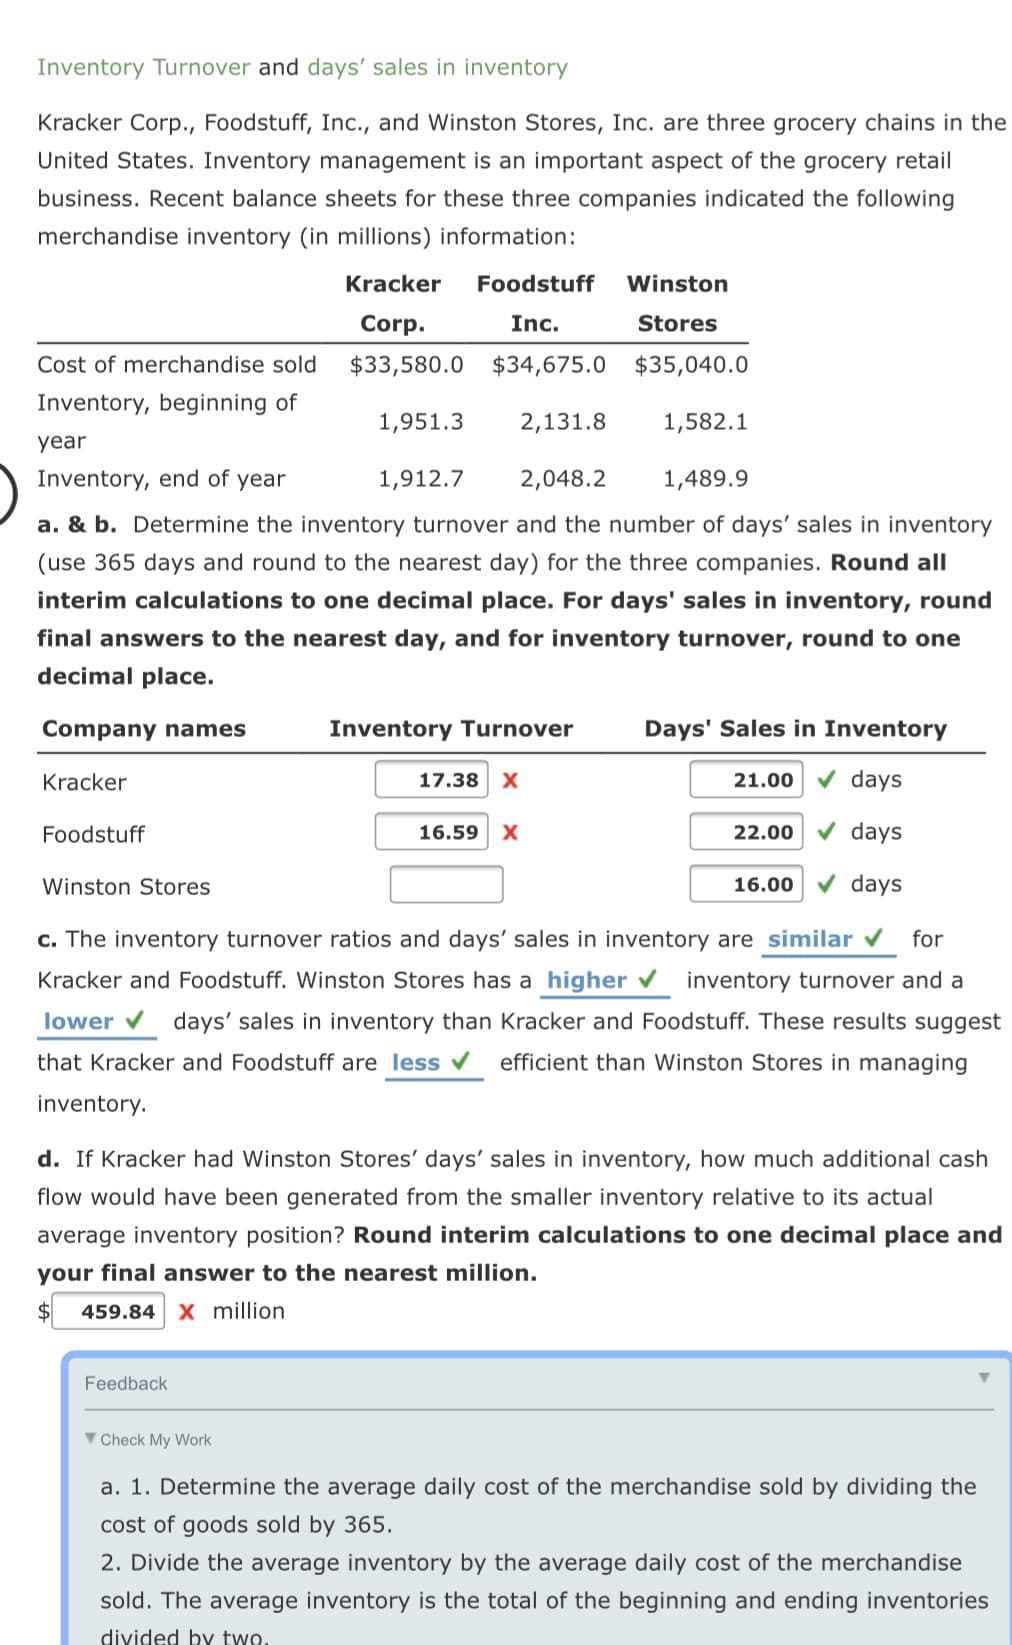 Inventory Turnover and days' sales in inventory
Kracker Corp., Foodstuff, Inc., and Winston Stores, Inc. are three grocery chains in the
United States. Inventory management is an important aspect of the grocery retail
business. Recent balance sheets for these three companies indicated the following
merchandise inventory (in millions) information:
Kracker
Foodstuff
Winston
Corp.
Inc.
Stores
Cost of merchandise sold
$33,580.0 $34,675.0 $35,040.0
Inventory, beginning of
1,951.3
2,131.8
1,582.1
year
Inventory, end of year
1,912.7
2,048.2
1,489.9
a. & b. Determine the inventory turnover and the number of days' sales in inventory
(use 365 days and round to the nearest day) for the three companies. Round all
interim calculations to one decimal place. For days' sales in inventory, round
final answers to the nearest day, and for inventory turnover, round to one
decimal place.
Company names
Inventory Turnover
Days' Sales in Inventory
Kracker
17.38 X
21.00 v days
Foodstuff
16.59
X
22.00 v days
Winston Stores
16.00
days
c. The inventory turnover ratios and days' sales in inventory are similar v
for
Kracker and Foodstuff. Winston Stores has a higher inventory turnover and a
lower v
days' sales in inventory than Kracker and Foodstuff. These results suggest
that Kracker and Foodstuff are less
efficient than Winston Stores in managing
inventory.
d. If Kracker had Winston Stores' days' sales in inventory, how much additional cash
flow would have been generated from the smaller inventory relative to its actual
average inventory position? Round interim calculations to one decimal place and
your final answer to the nearest million.
$
459.84 X million
Feedback
V Check My Work
a. 1. Determine the average daily cost of the merchandise sold by dividing the
cost of goods sold by 365.
2. Divide the average inventory by the average daily cost of the merchandise
sold. The average inventory is the total of the beginning and ending inventories
divided by two.
